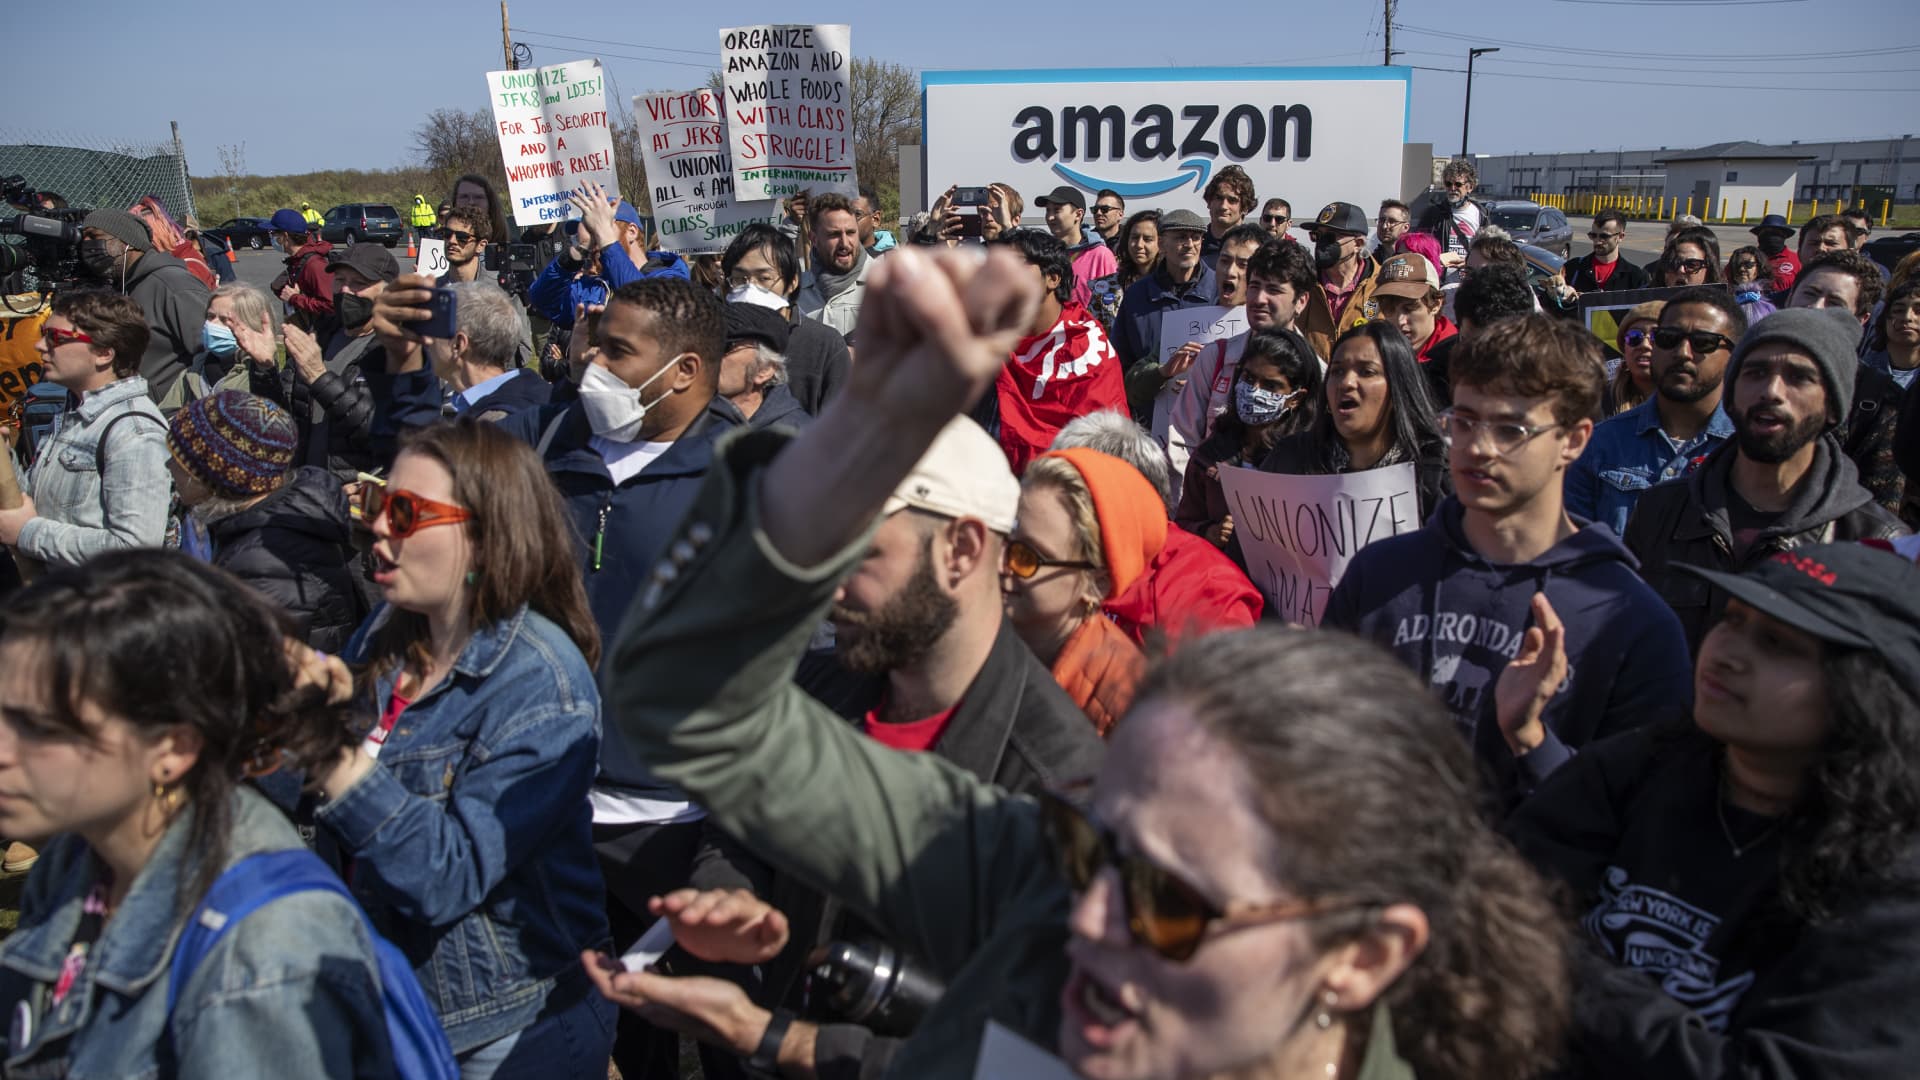 Amazon violated federal labor law by calling Staten Island union organizers “thugs”